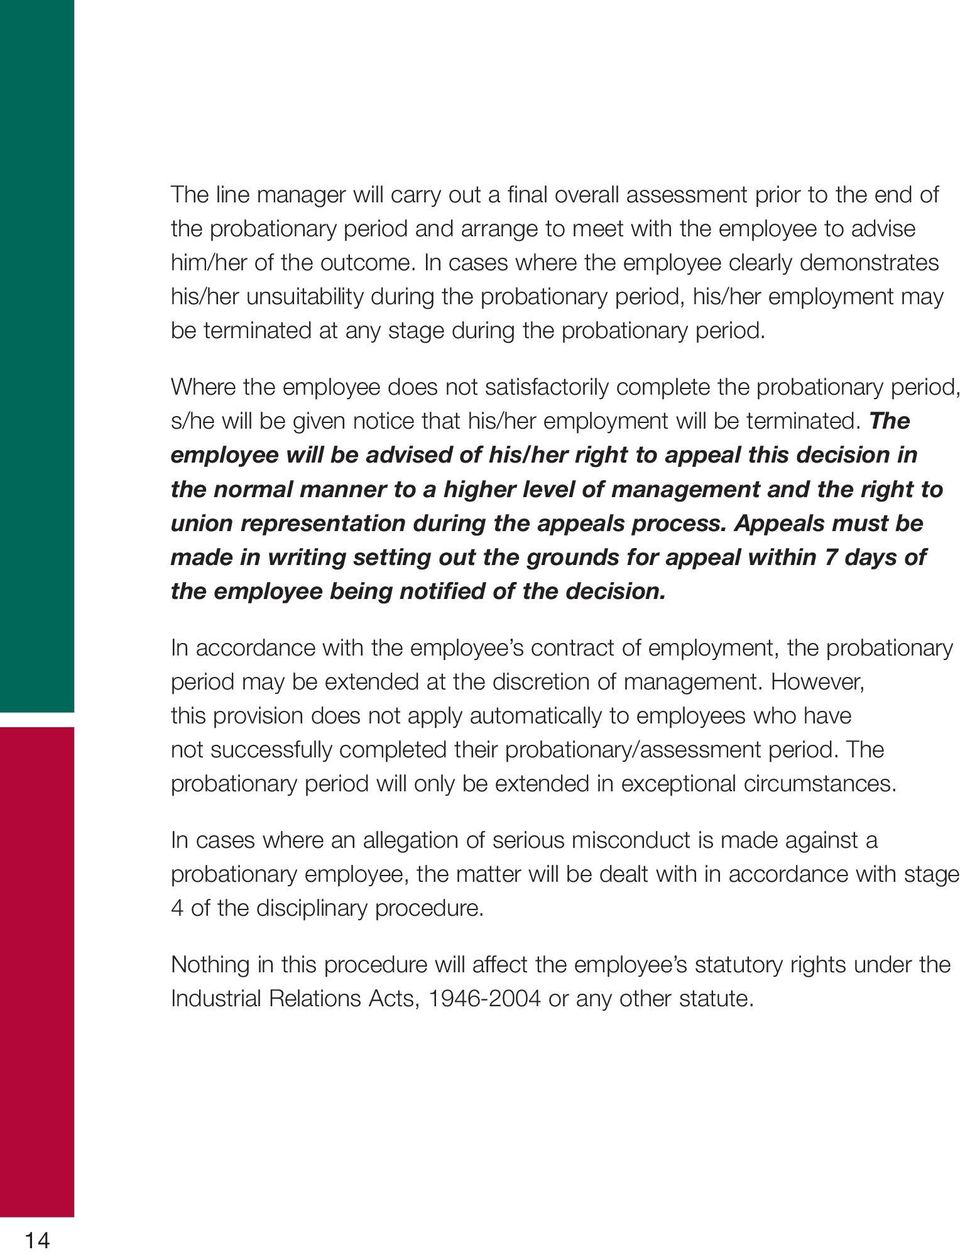 Where the employee does not satisfactorily complete the probationary period, s/he will be given notice that his/her employment will be terminated.